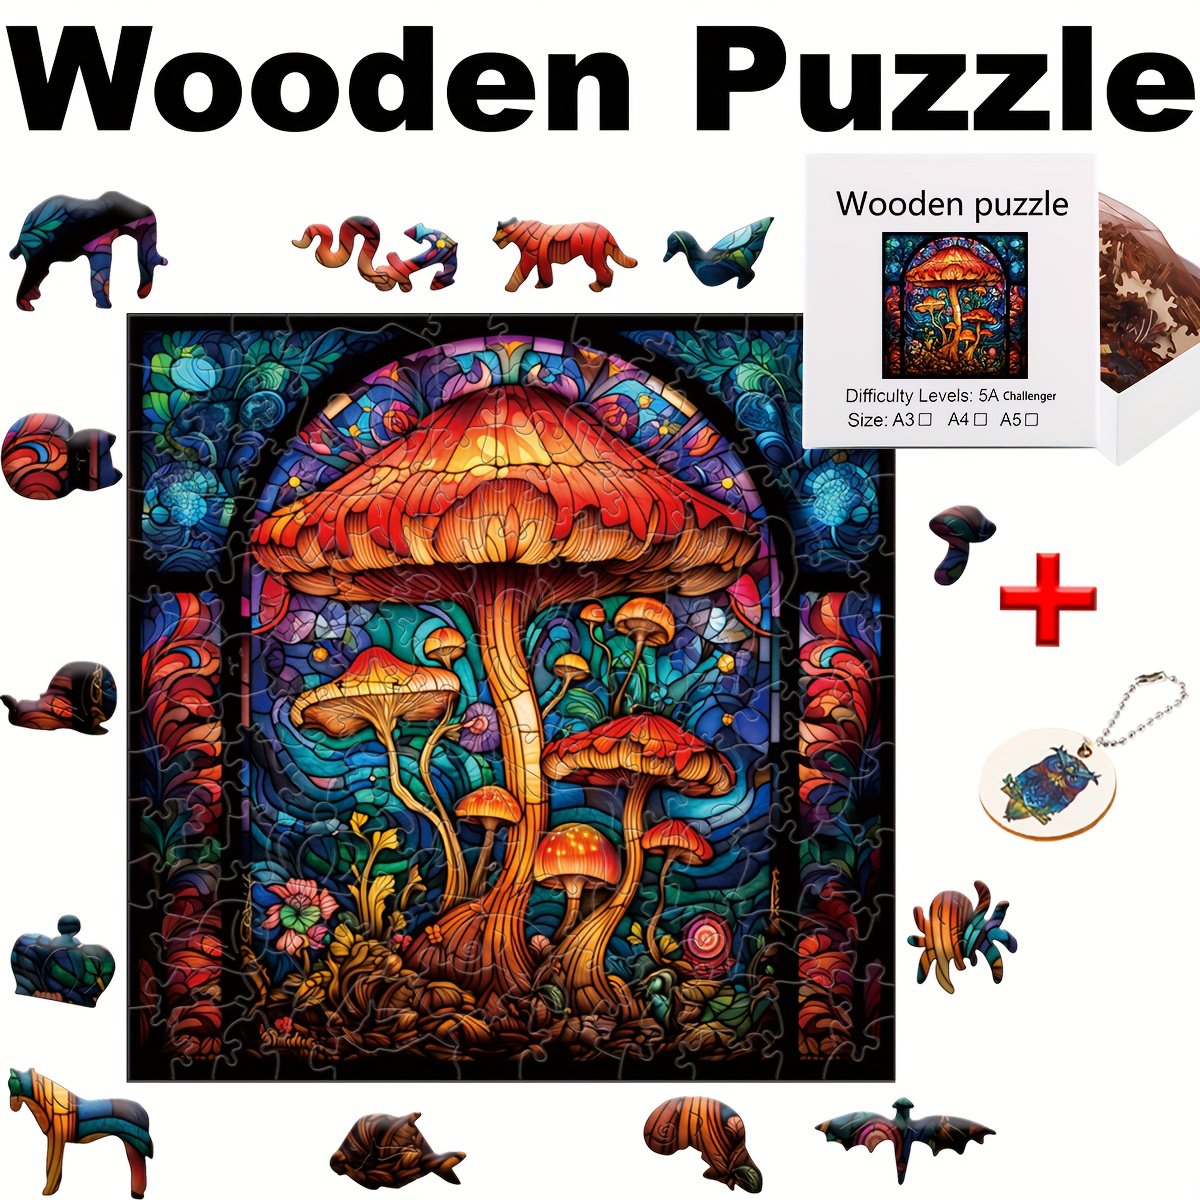 

Mushroom Cross Wooden – Montessori Educational Toy For Adults, Interactive Family Game, 14+ Plywood Artistic Puzzle, Challenging Brain Teaser For Puzzle Enthusiasts